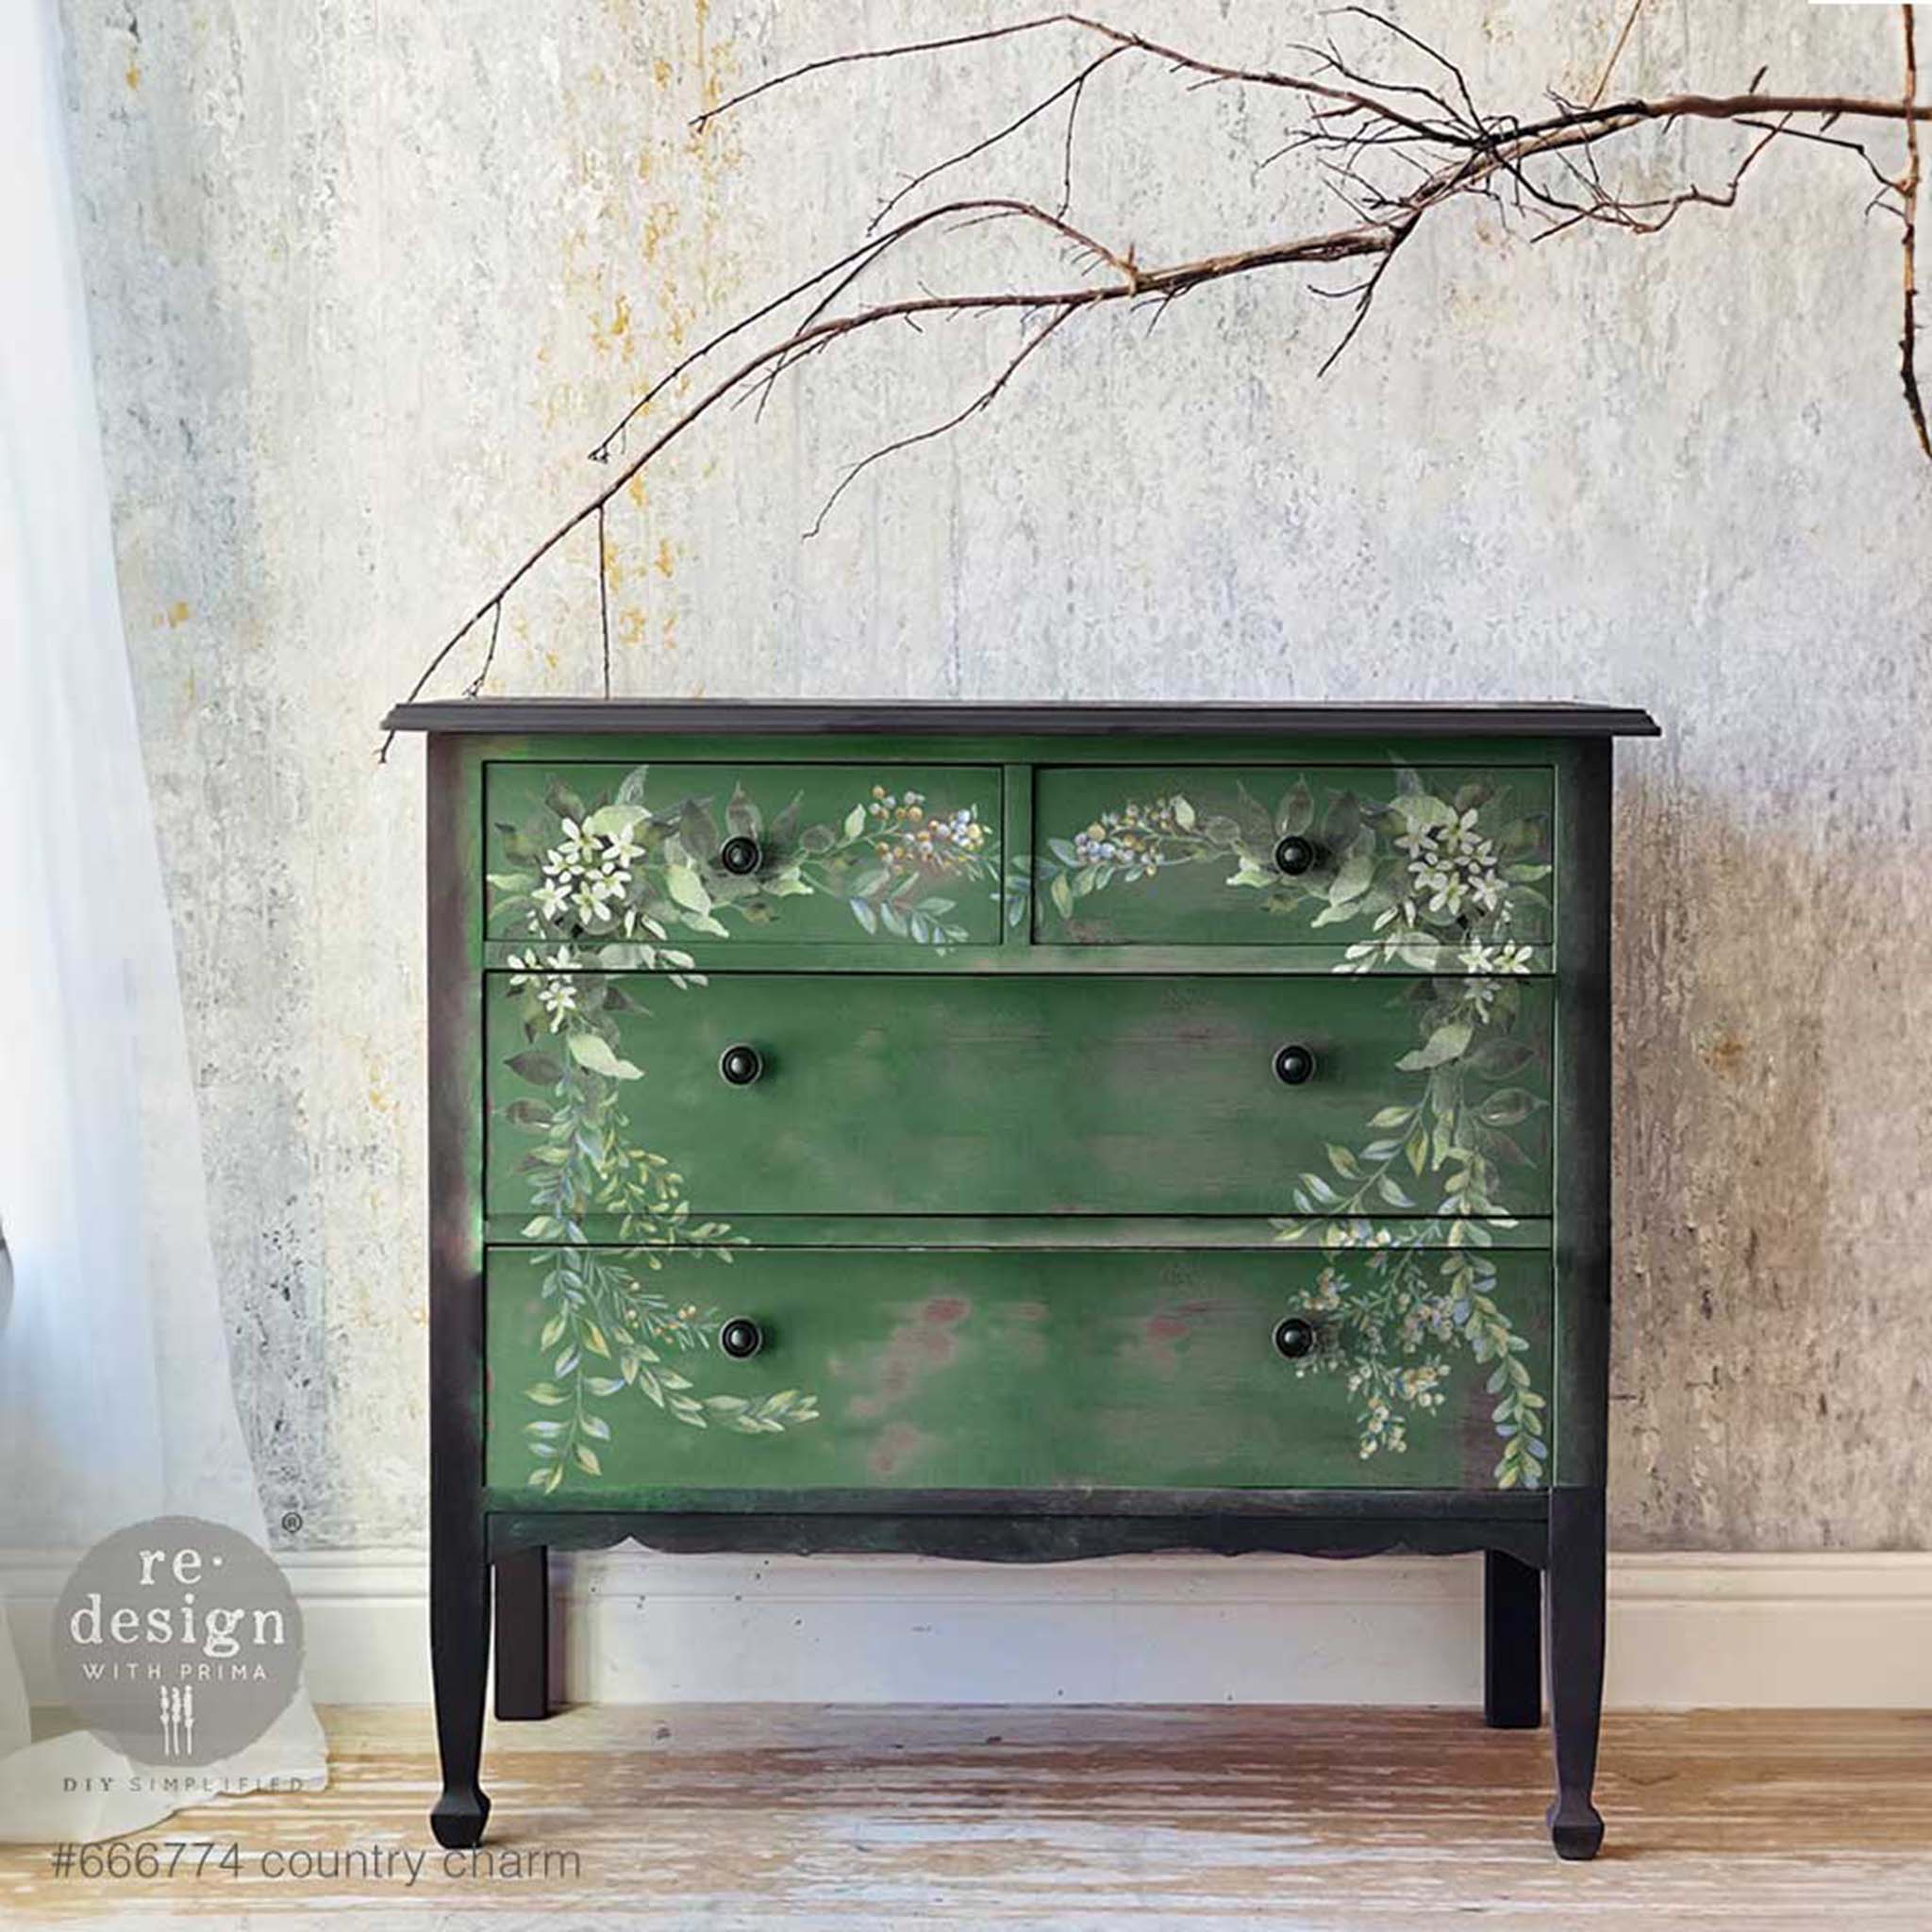 A vintage 4-drawer dresser is painted black with dark green on the drawers. ReDesign with Prima's Country Charm 12"x12" rub-on transfer is featured on the drawers.